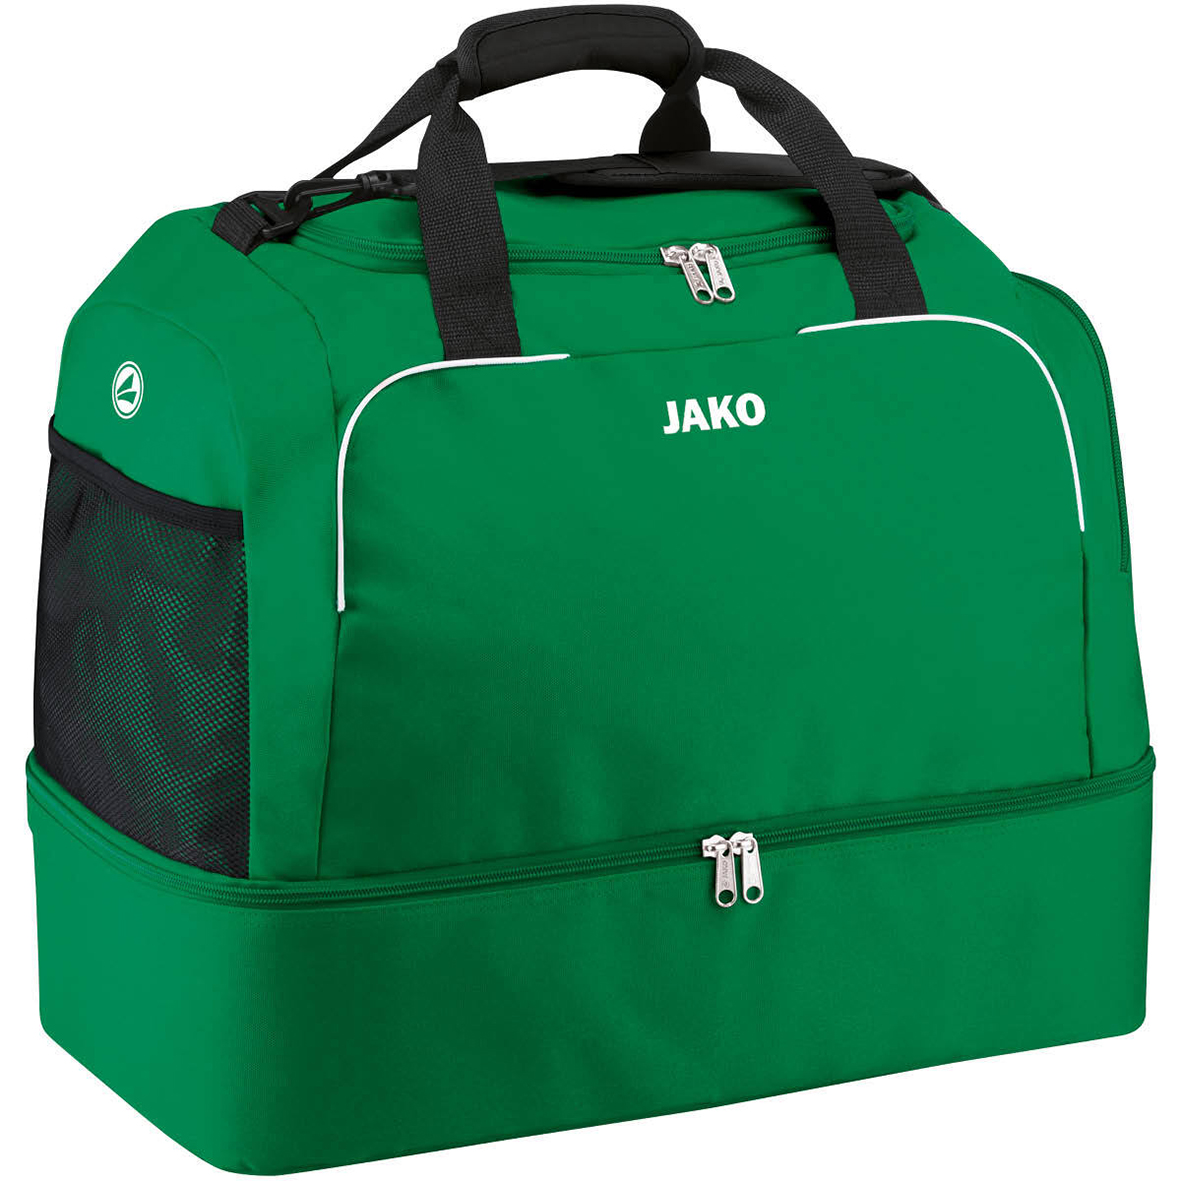 SPORTS BAG JAKO CLASSICO WITH BASE COMPARTMENT, SPORT GREEN.